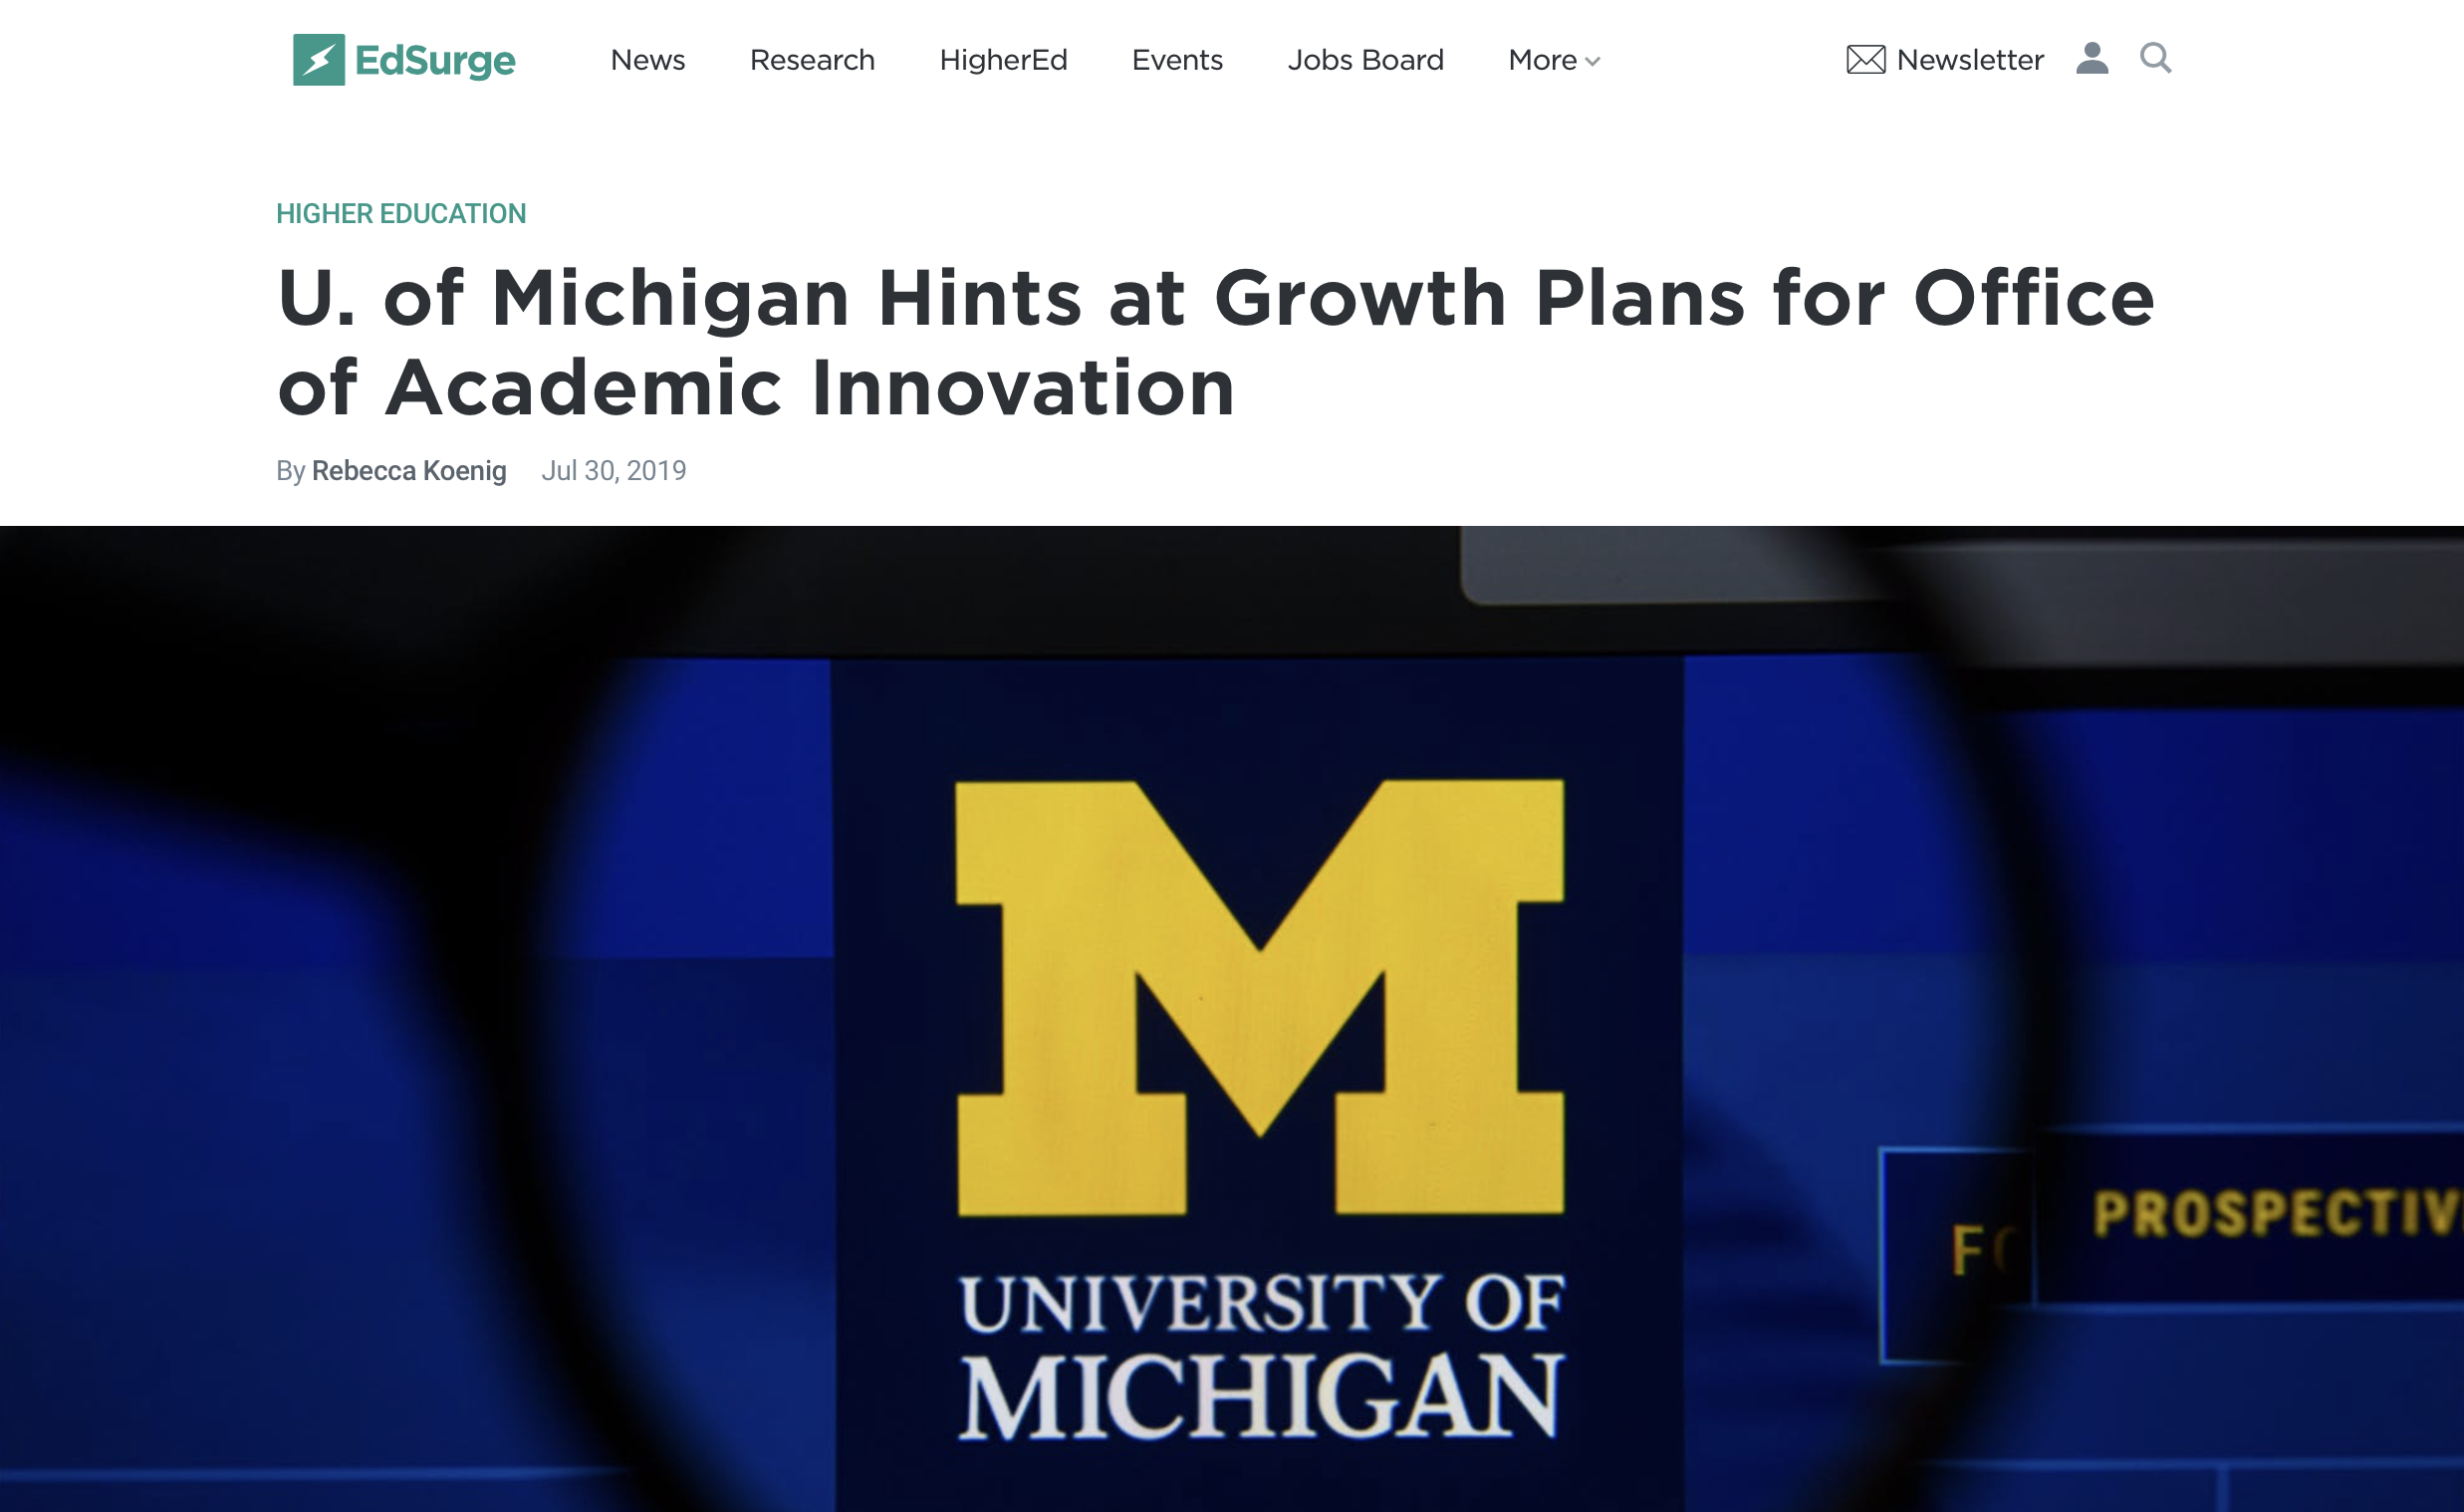 U. of Michigan Hints at Growth Plans for Office of Academic Innovation